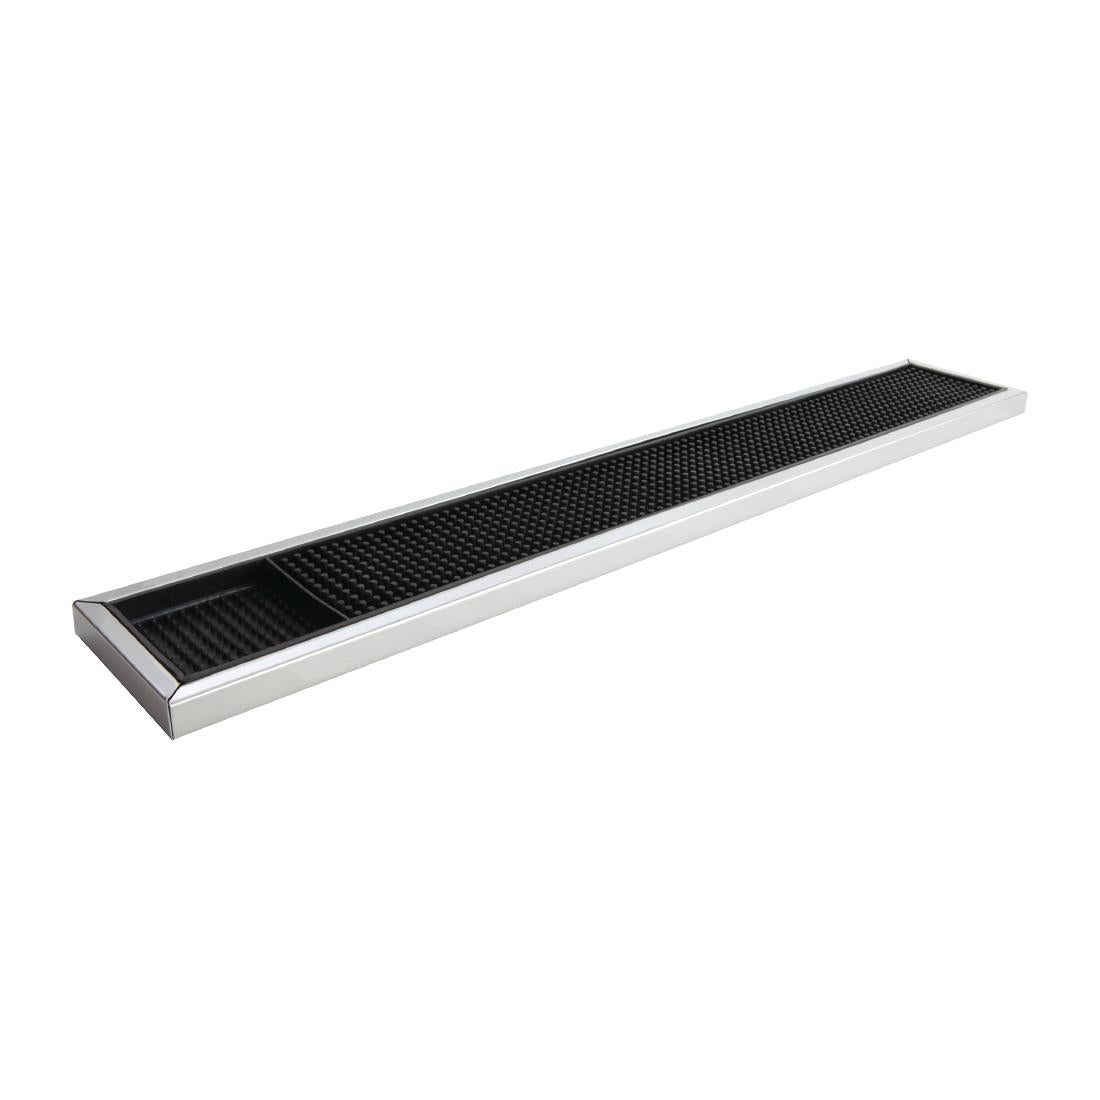 CN741 Beaumont Rubber Bar Mat with Stainless Steel Frame 600 x 100mm